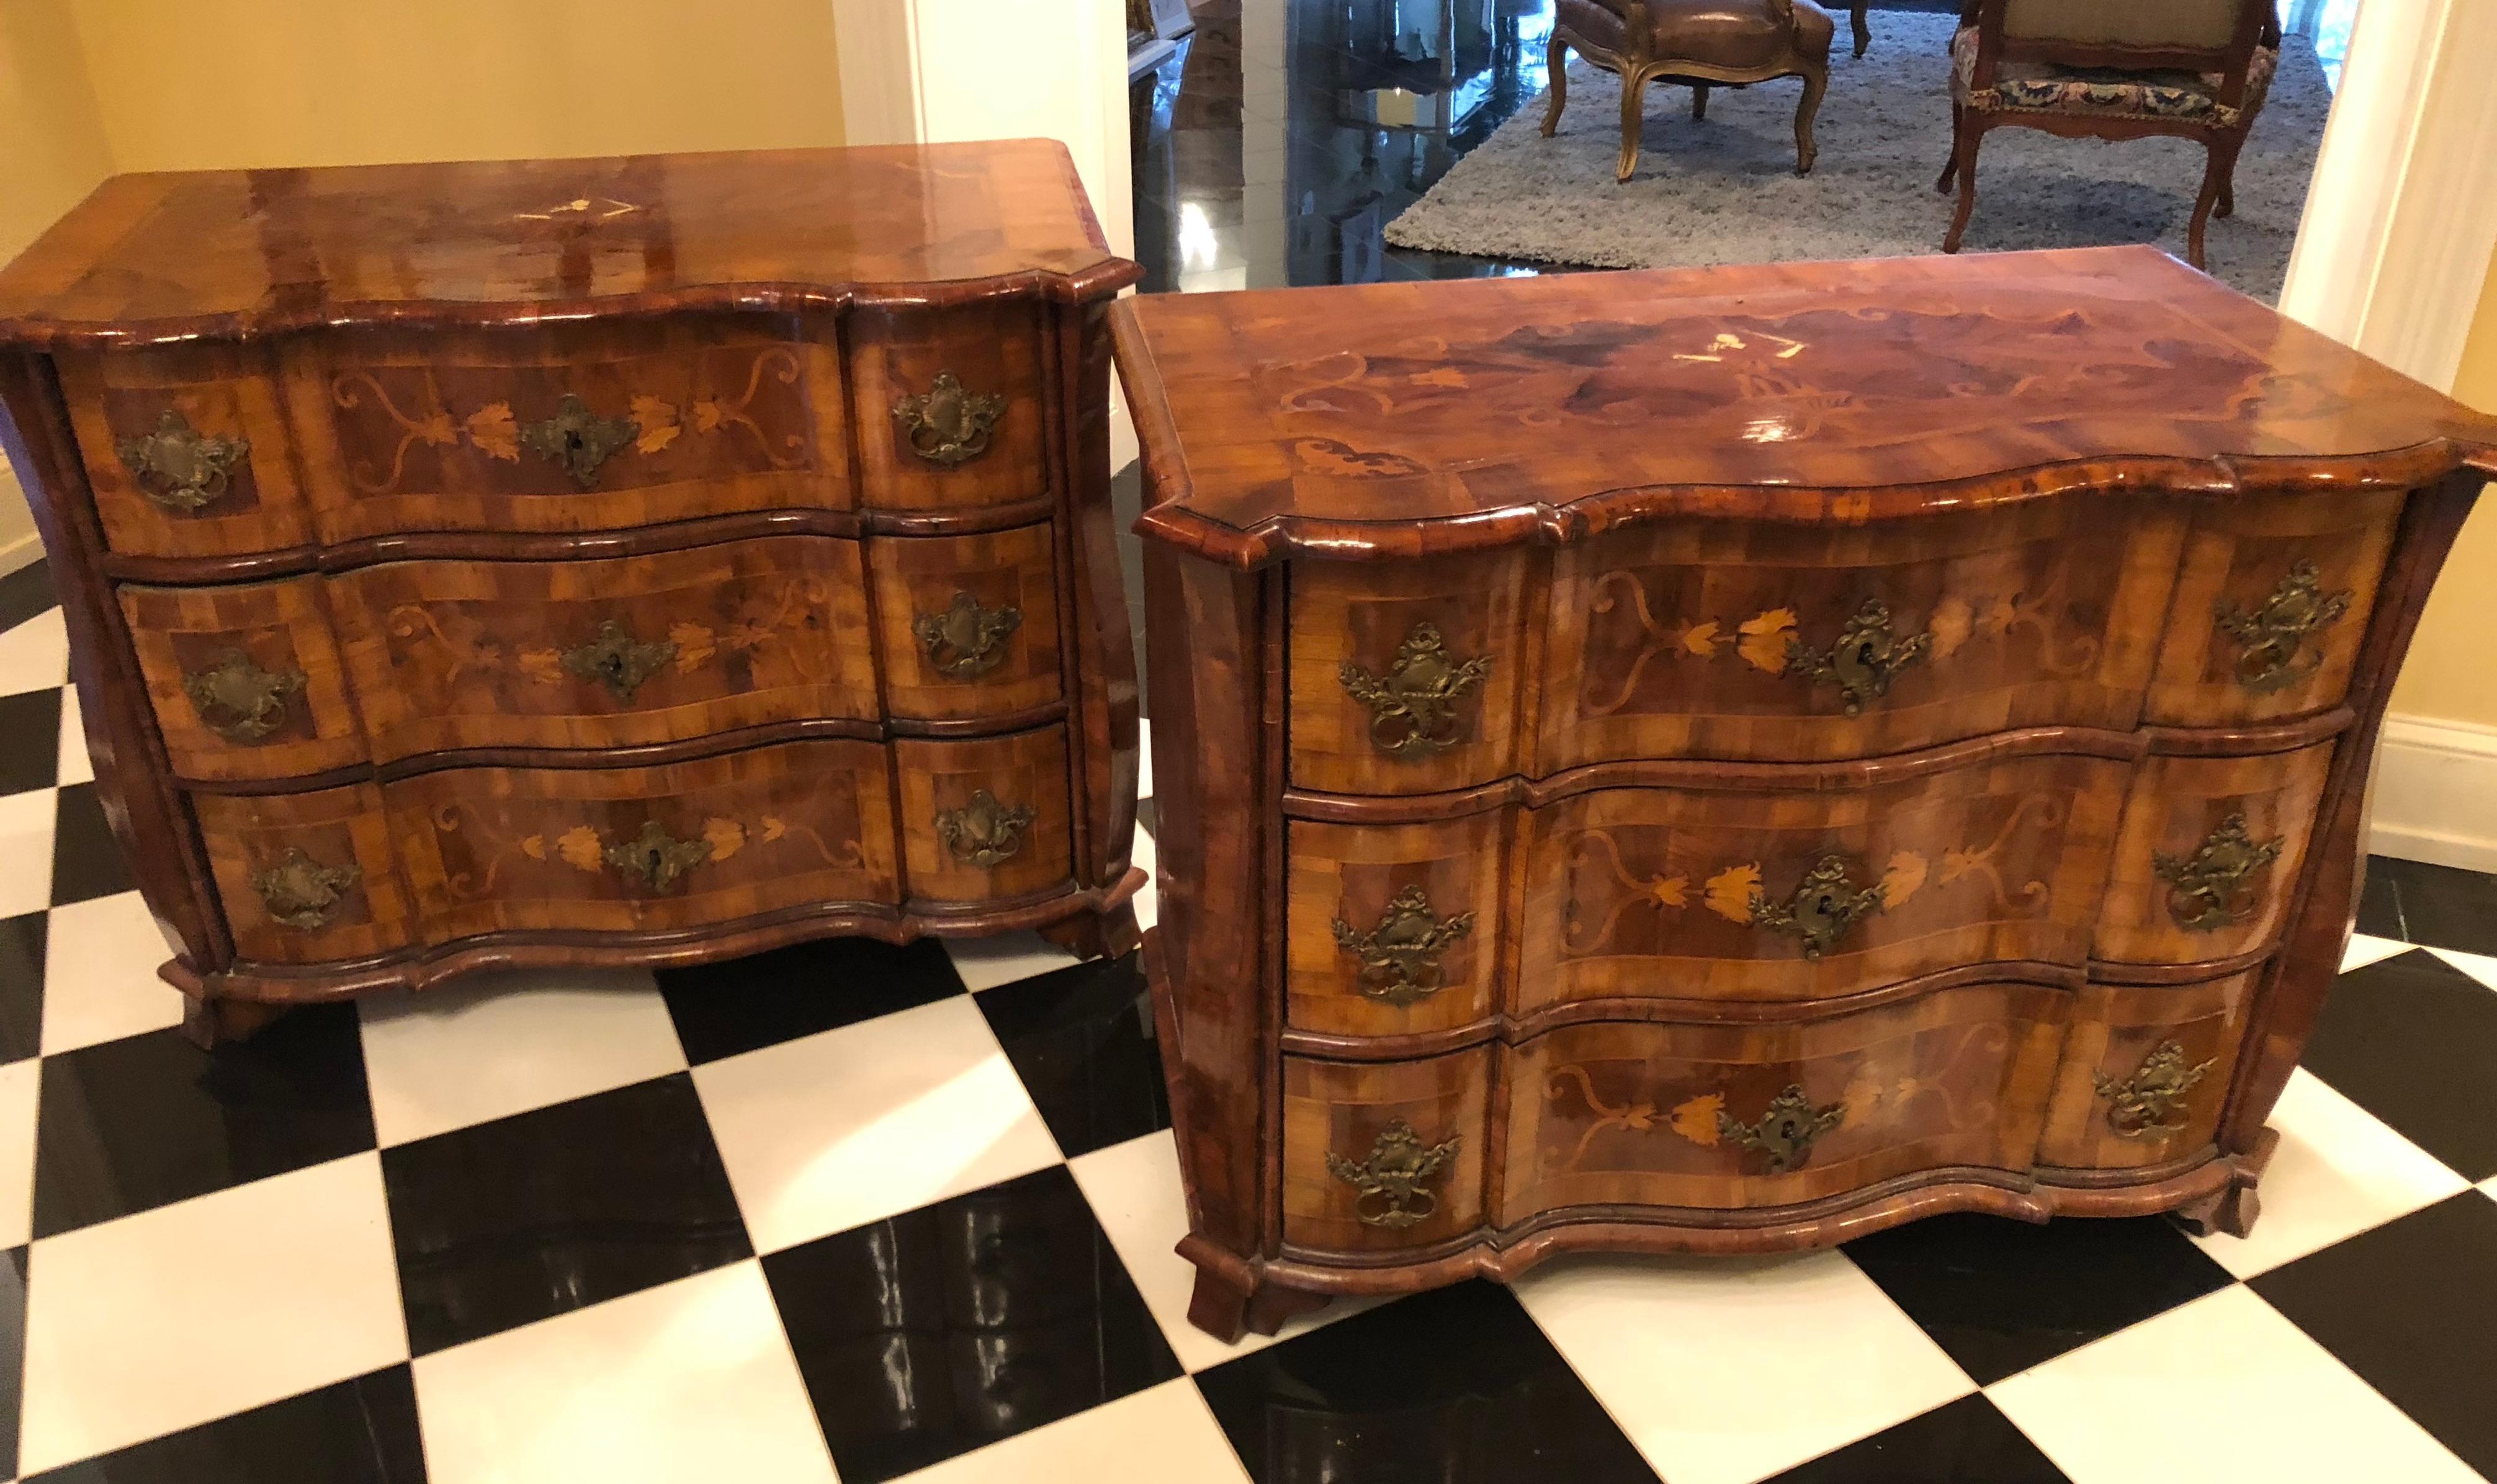 This extraordinary pair of early 18th century Bavarian commodes have exaggerated serpentine and Bombay shaped fronts with three drawers. Made of Circassian walnut with intricate inlaid floral and geometric marquetry in exotic woods the tops of each